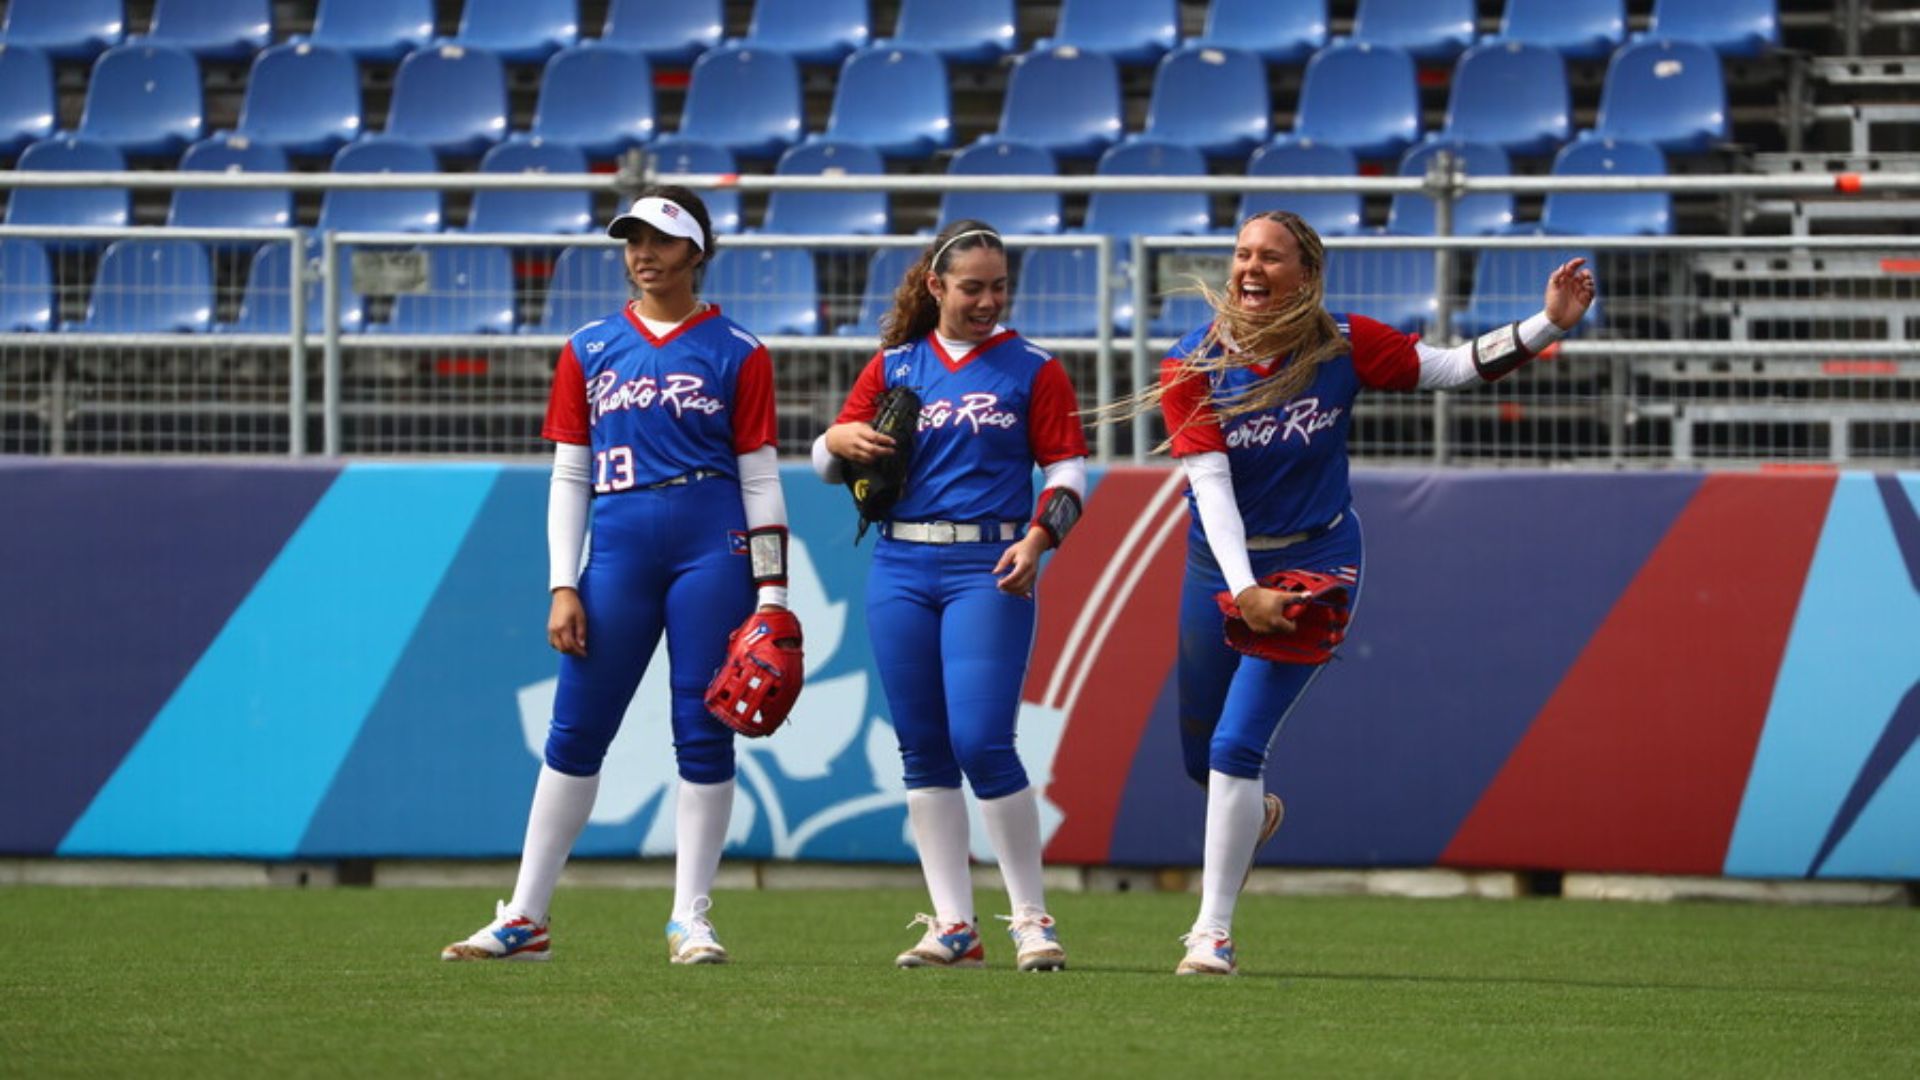 Puerto Rico asserted its credentials over Peru in female softball